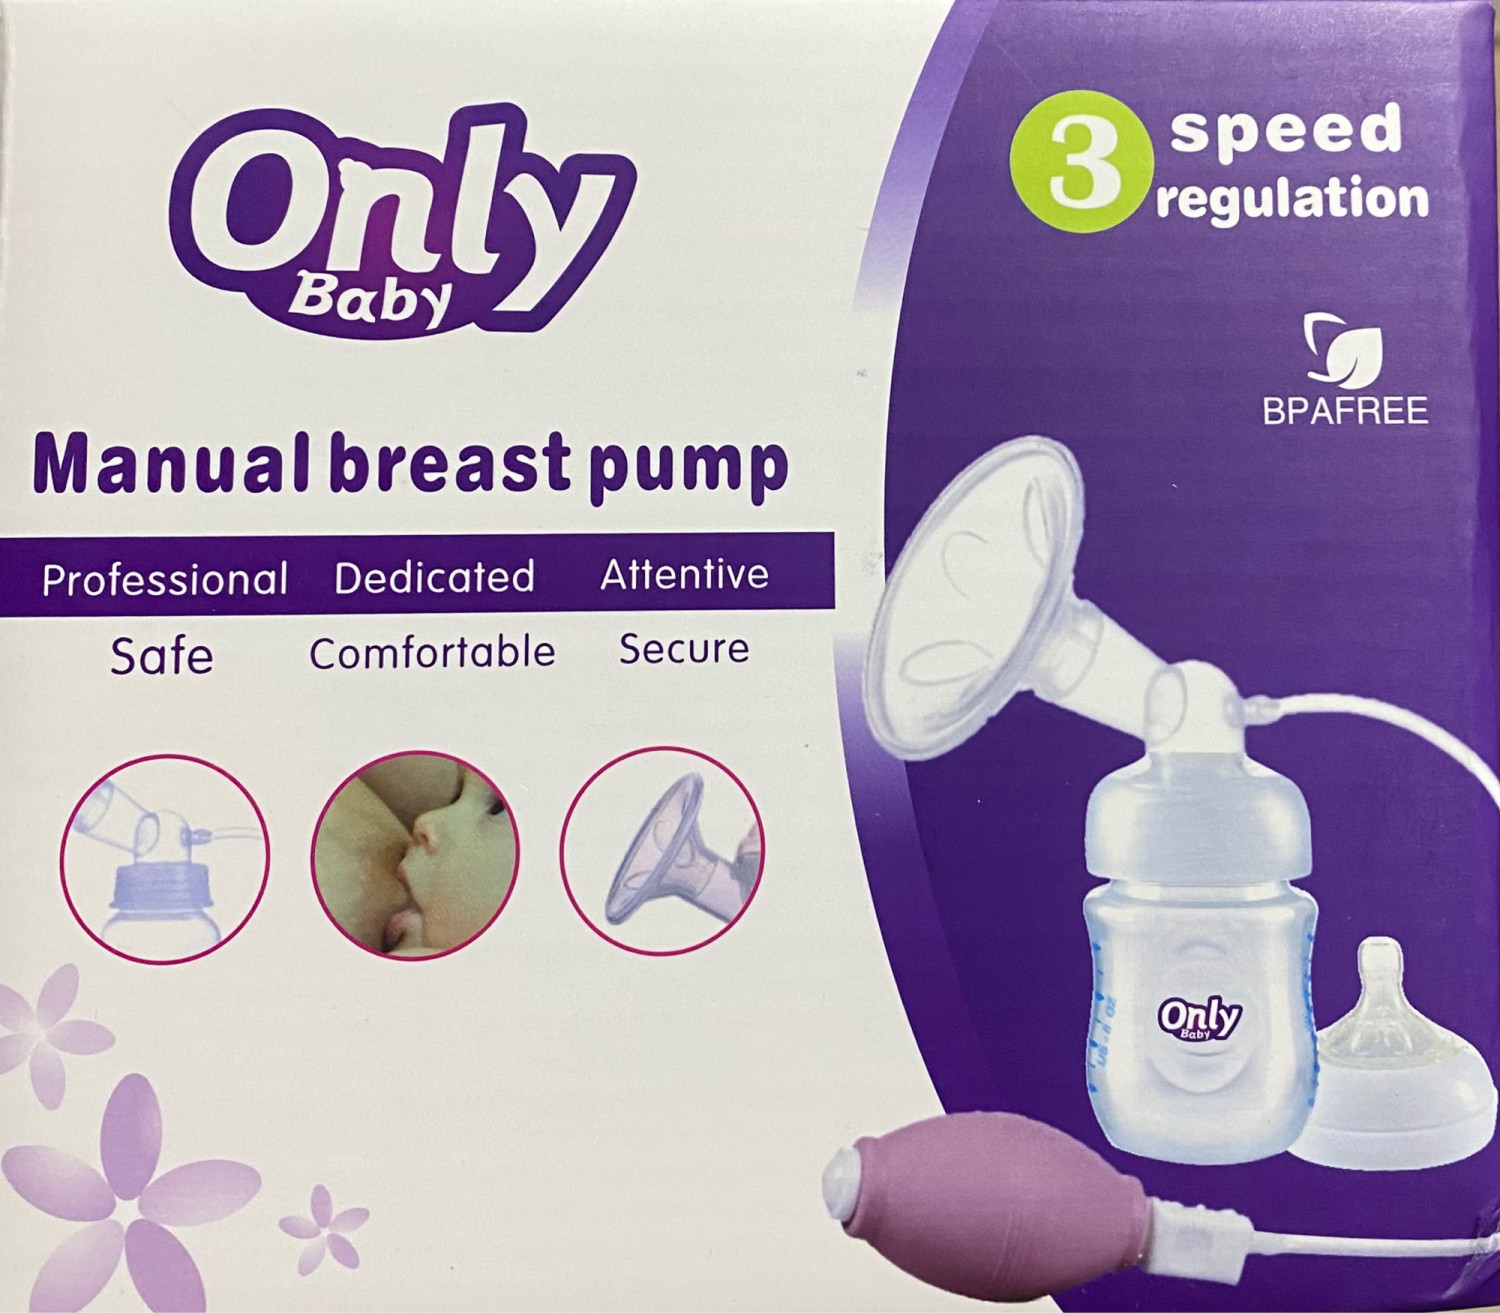 Only baby manual breast pump